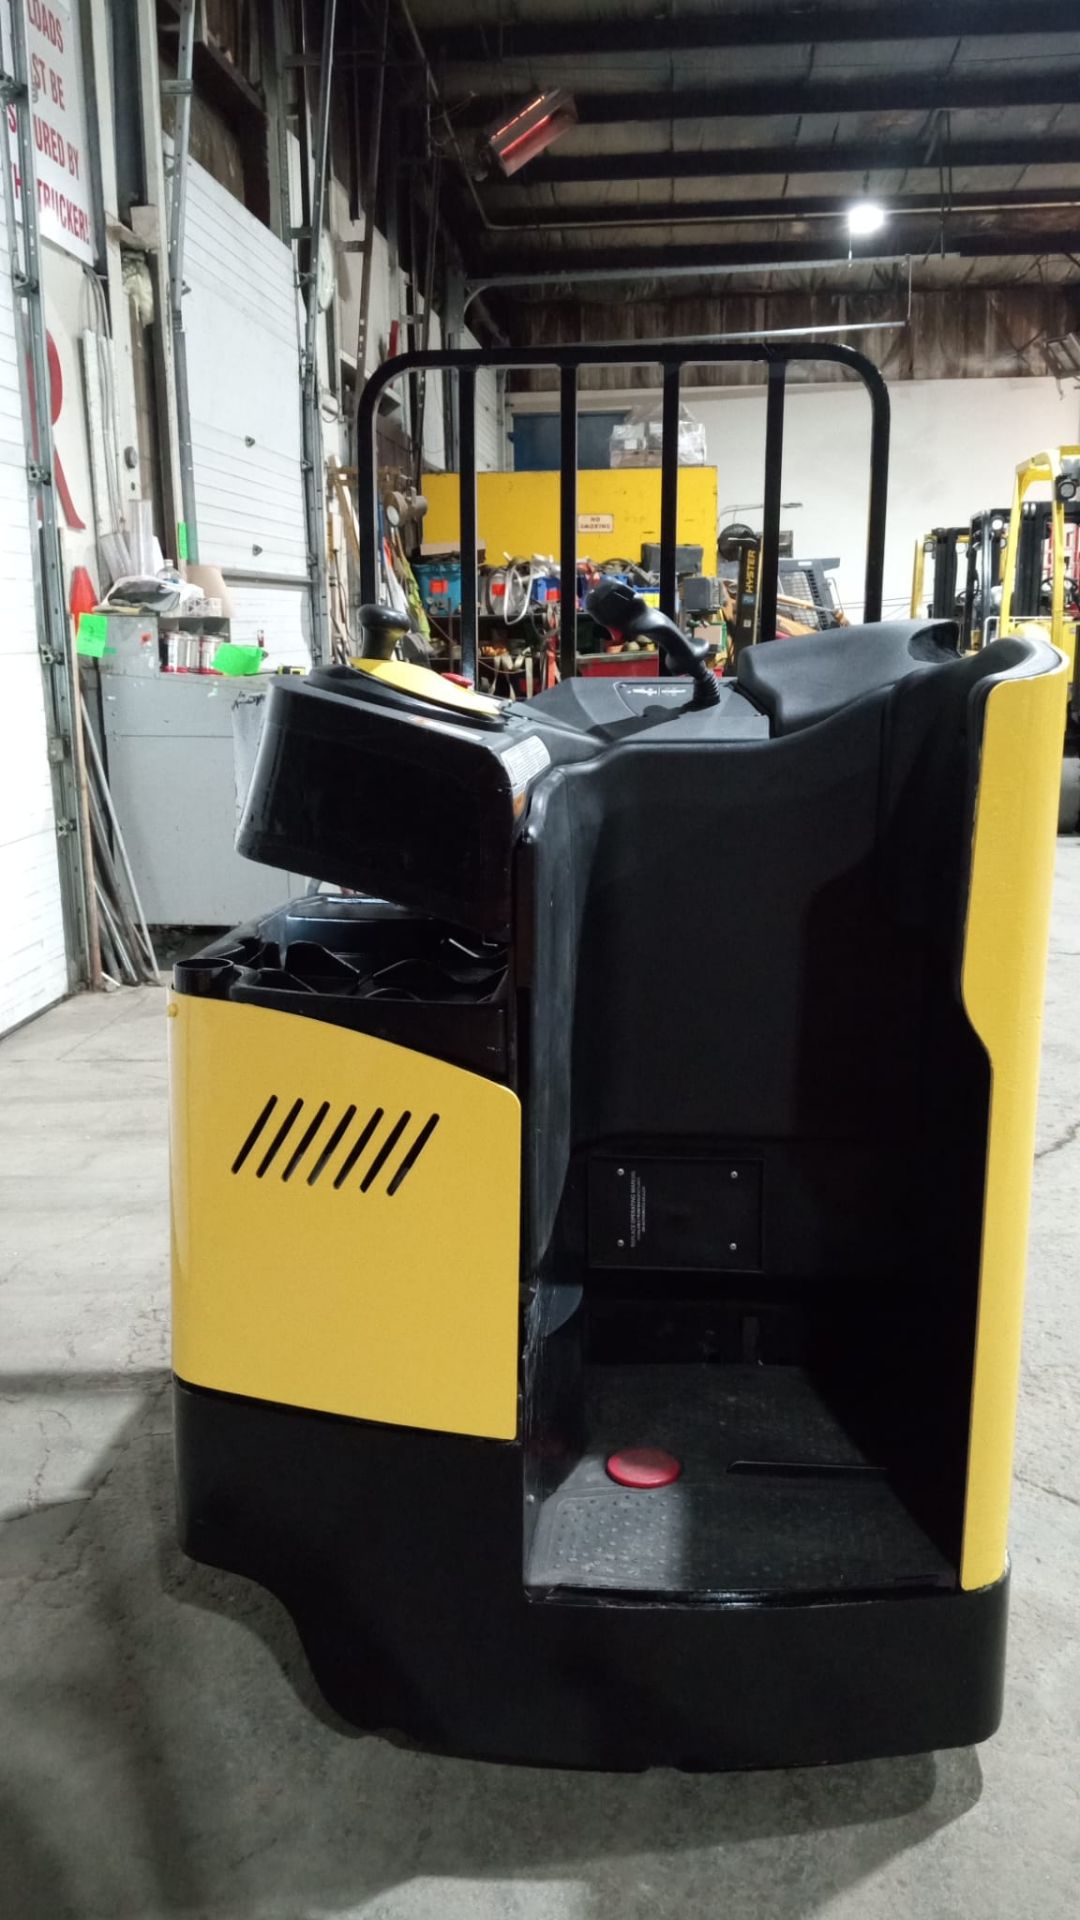 2015 Hyster RIDE ON 8000lbs capacity LONG JOHN 8' Long Forks Powered Pallet Cart 24V - Ride on unit - Image 4 of 7